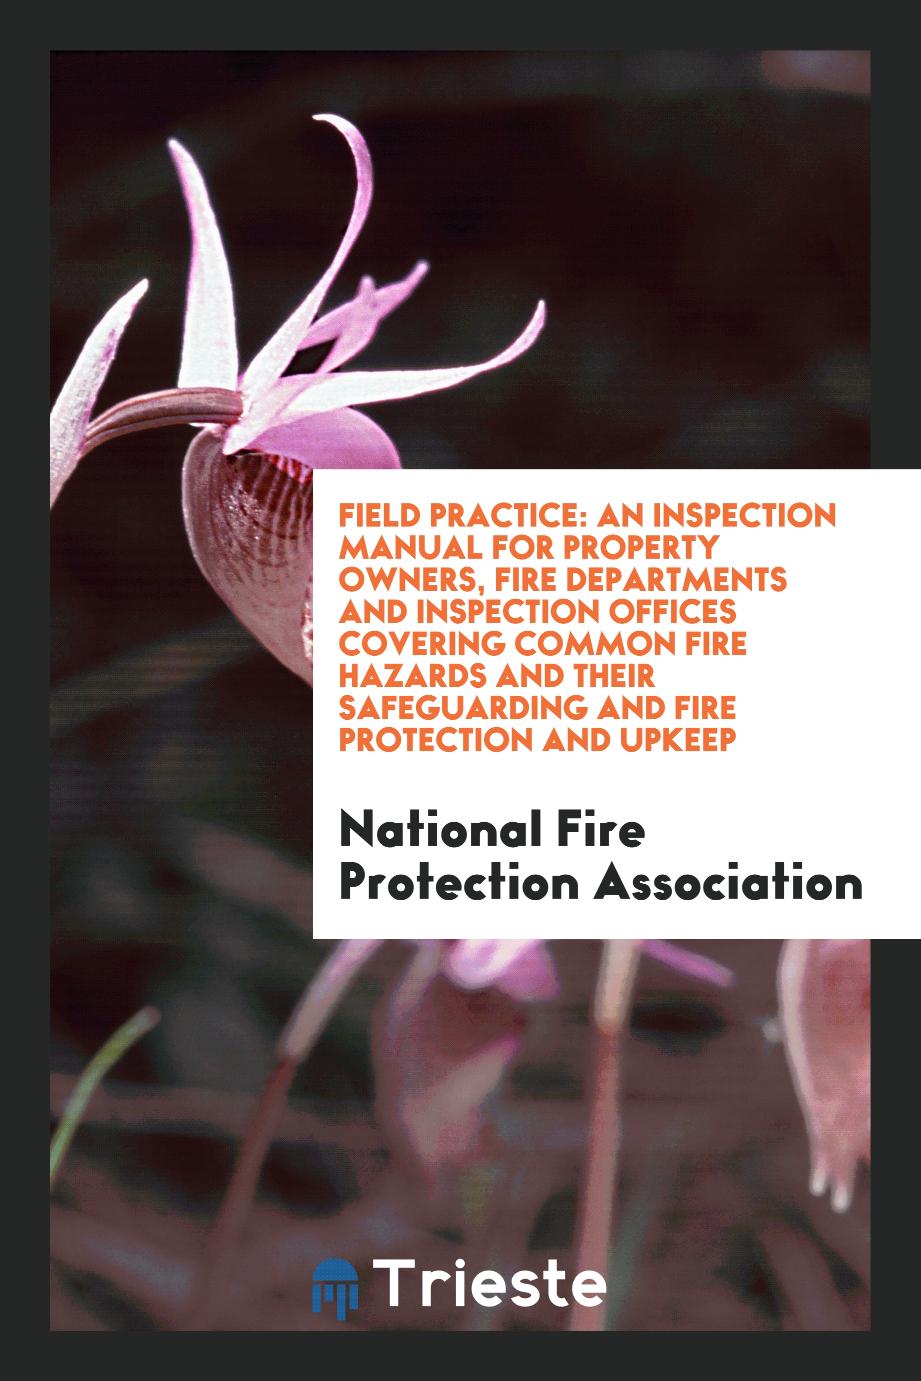 National Fire Protection Association - Field Practice: An Inspection Manual for Property Owners, Fire Departments and Inspection Offices Covering Common Fire Hazards and Their Safeguarding and Fire Protection and Upkeep